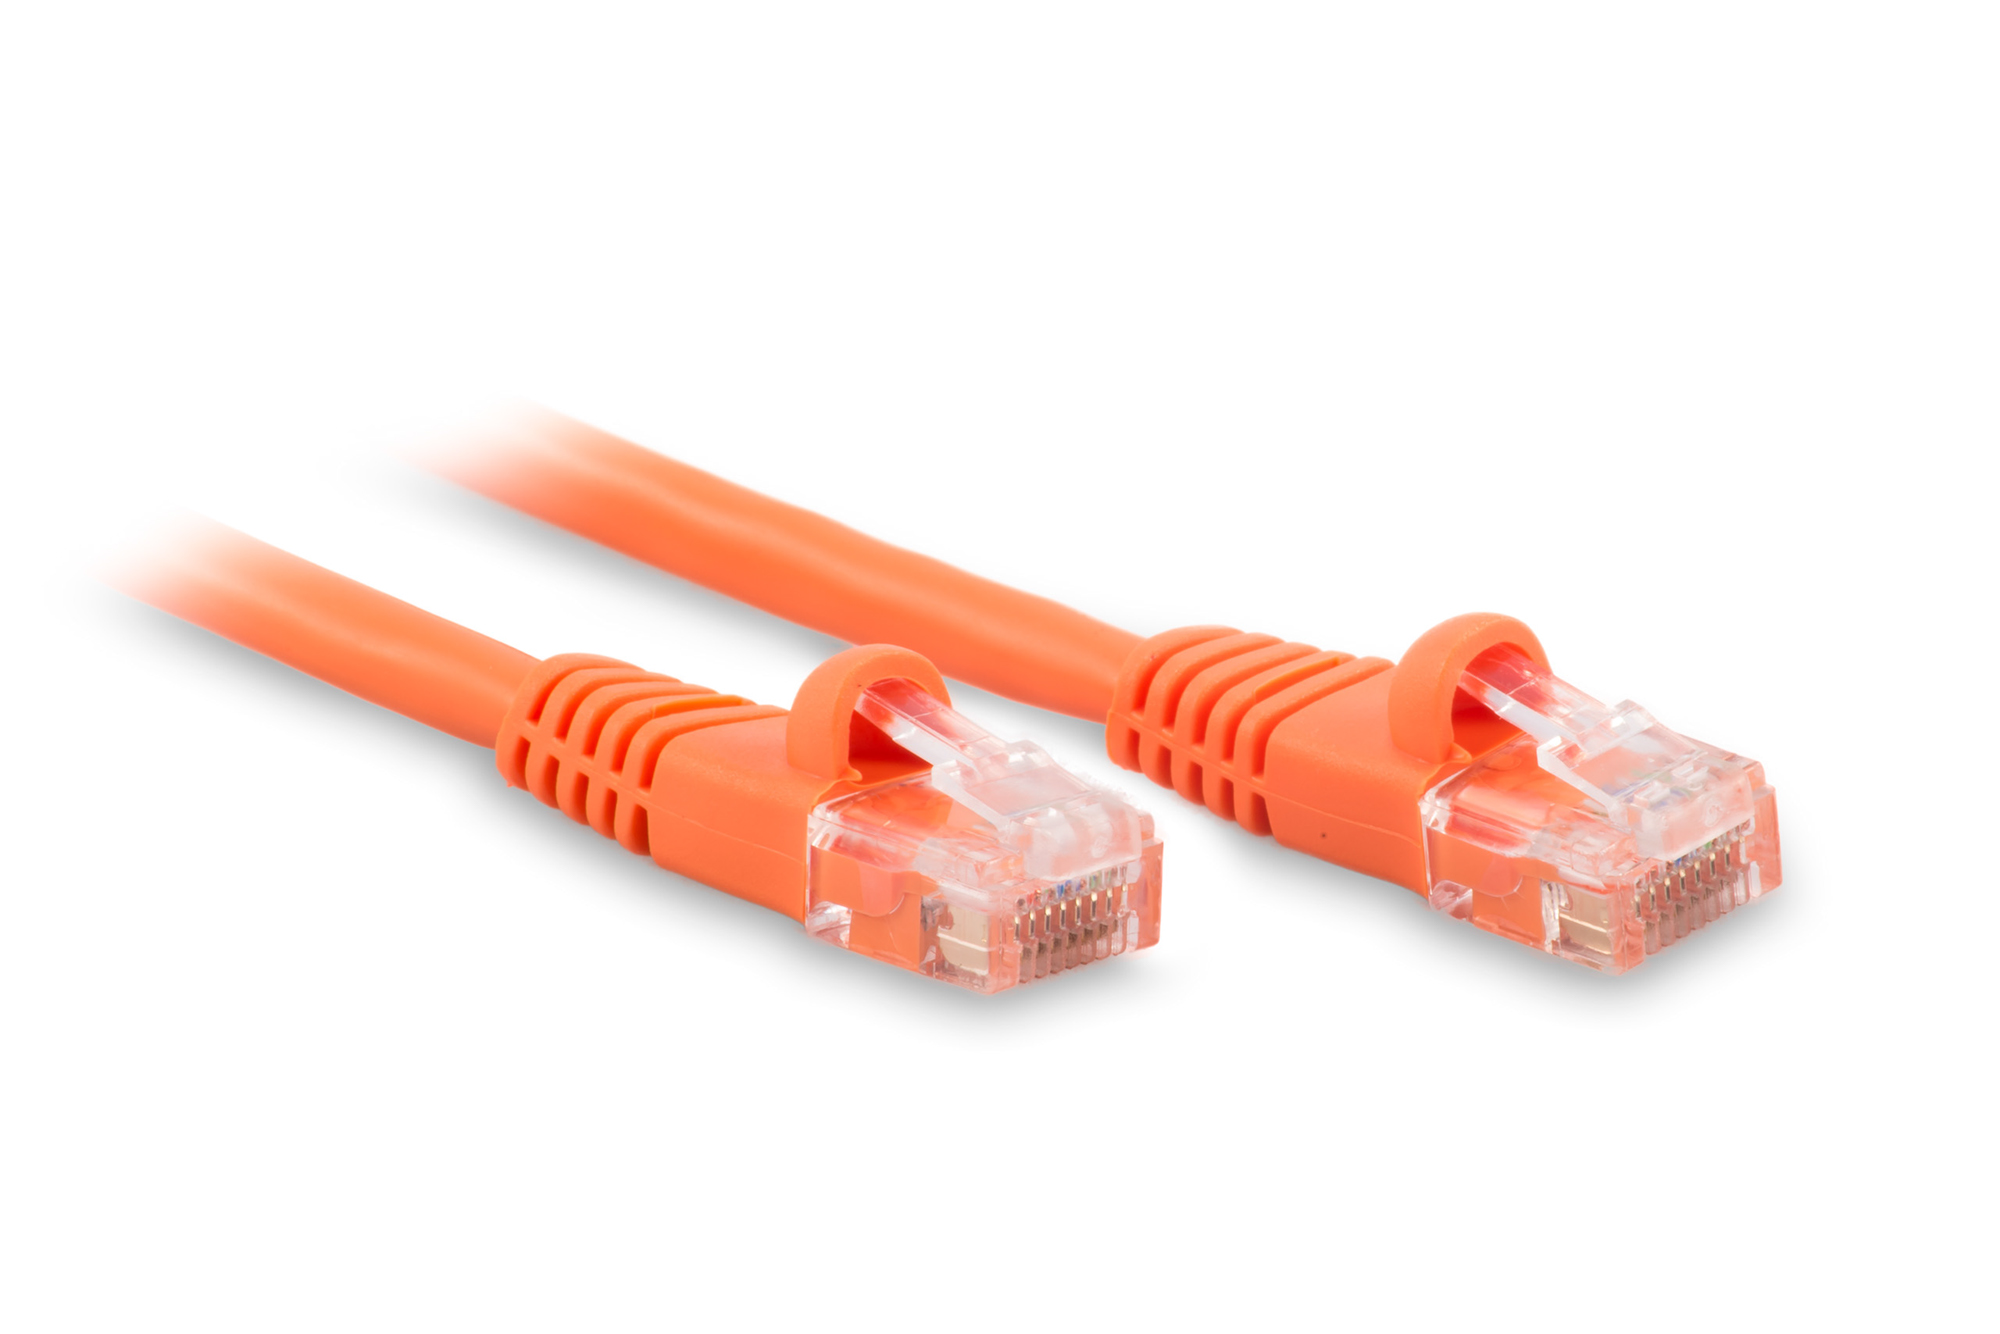 200ft Cat6 Ethernet Patch Cable - Orange Color - Snagless Boot